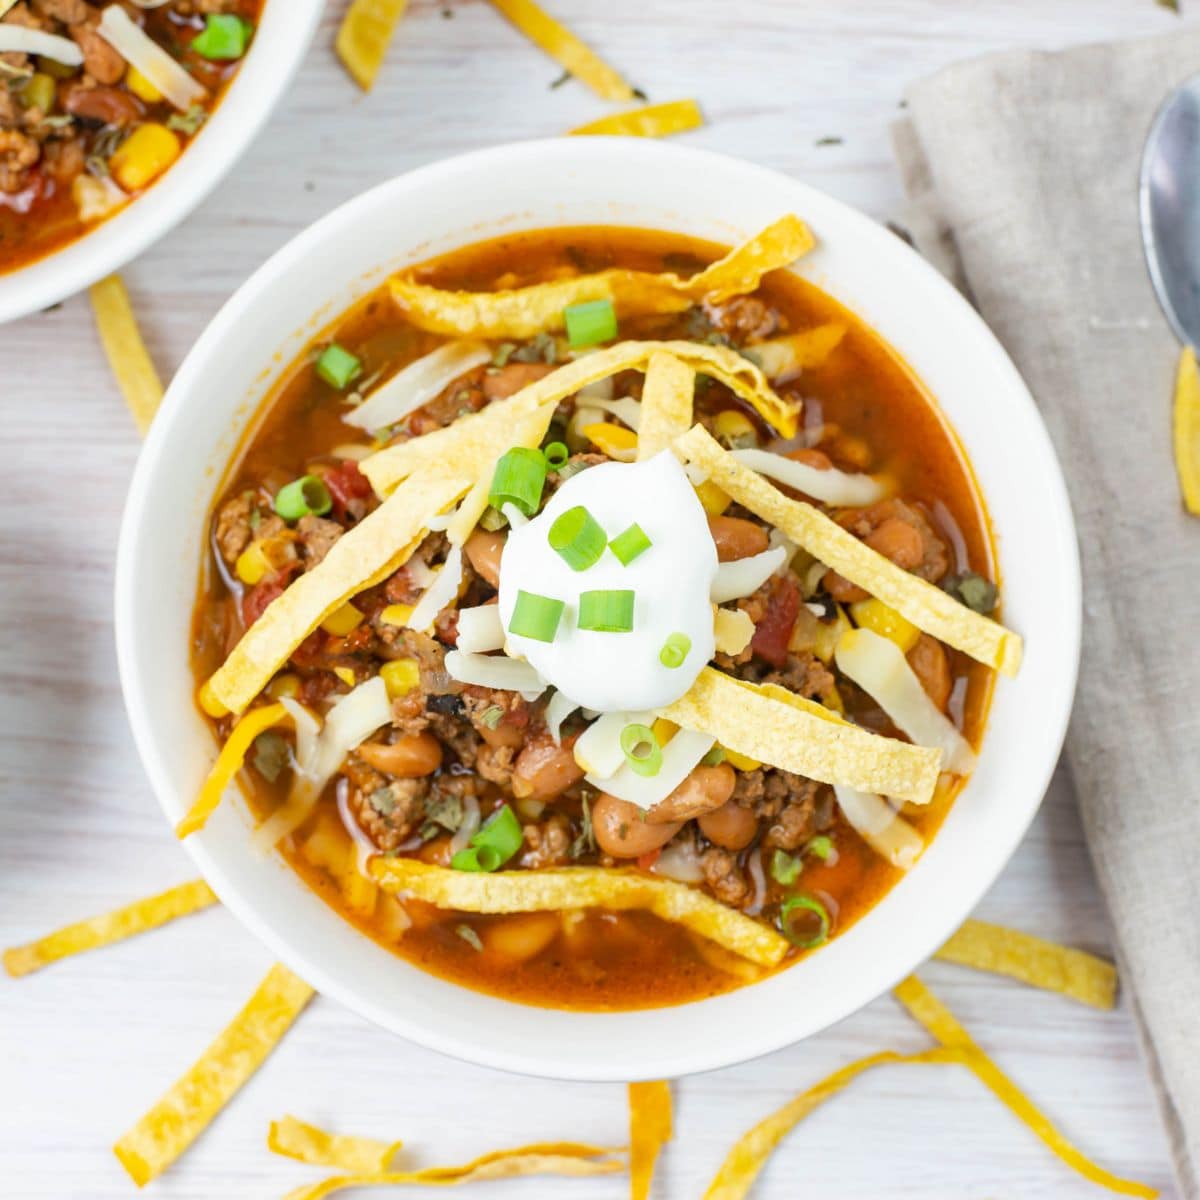 Overhead image of a bowl of Taco soup with toppings.